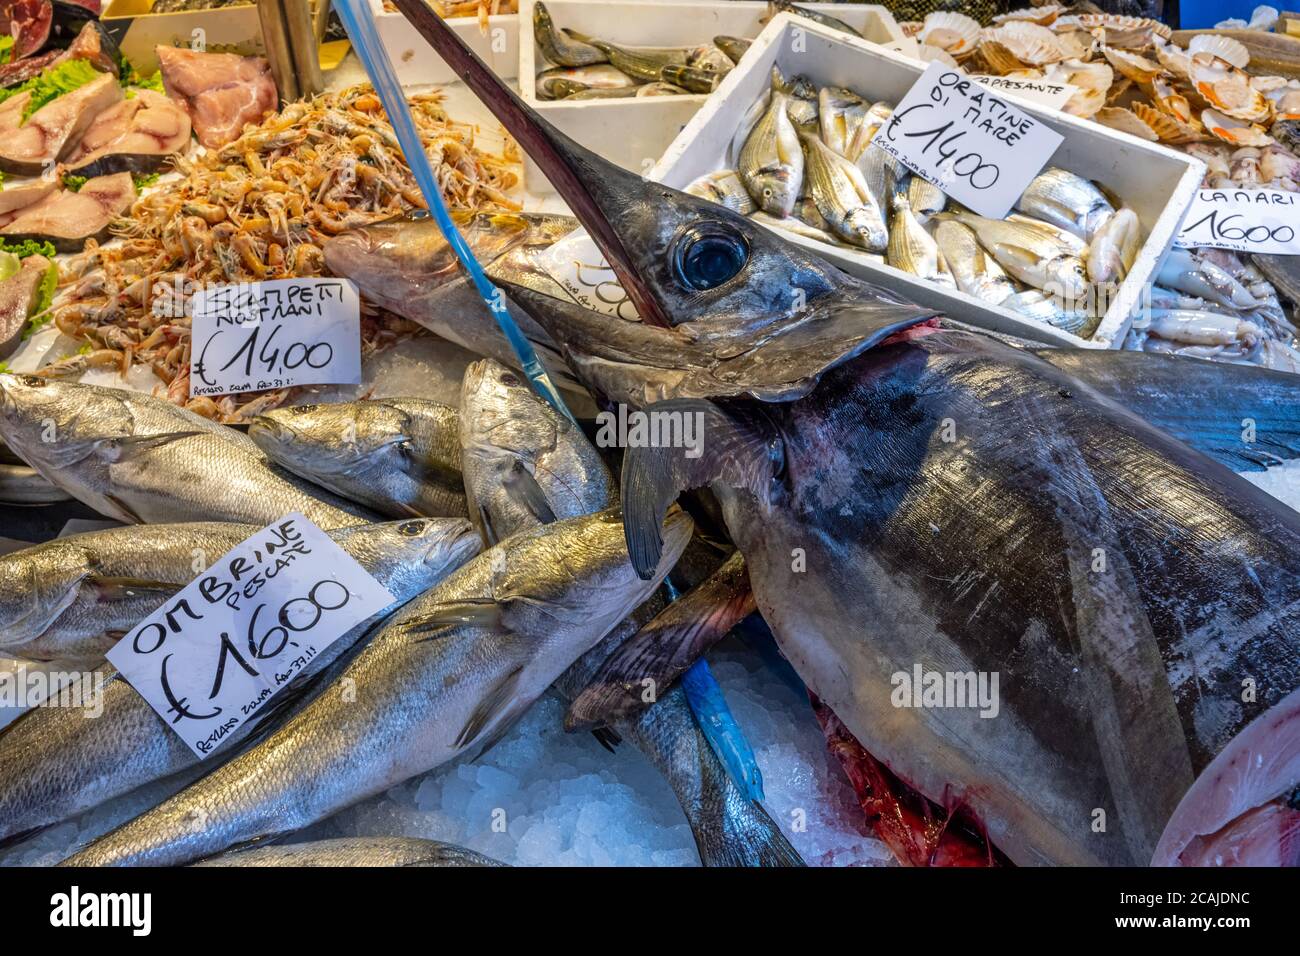 Swordfish and other fish and seafood for sale at a market in Venice, Italy Stock Photo